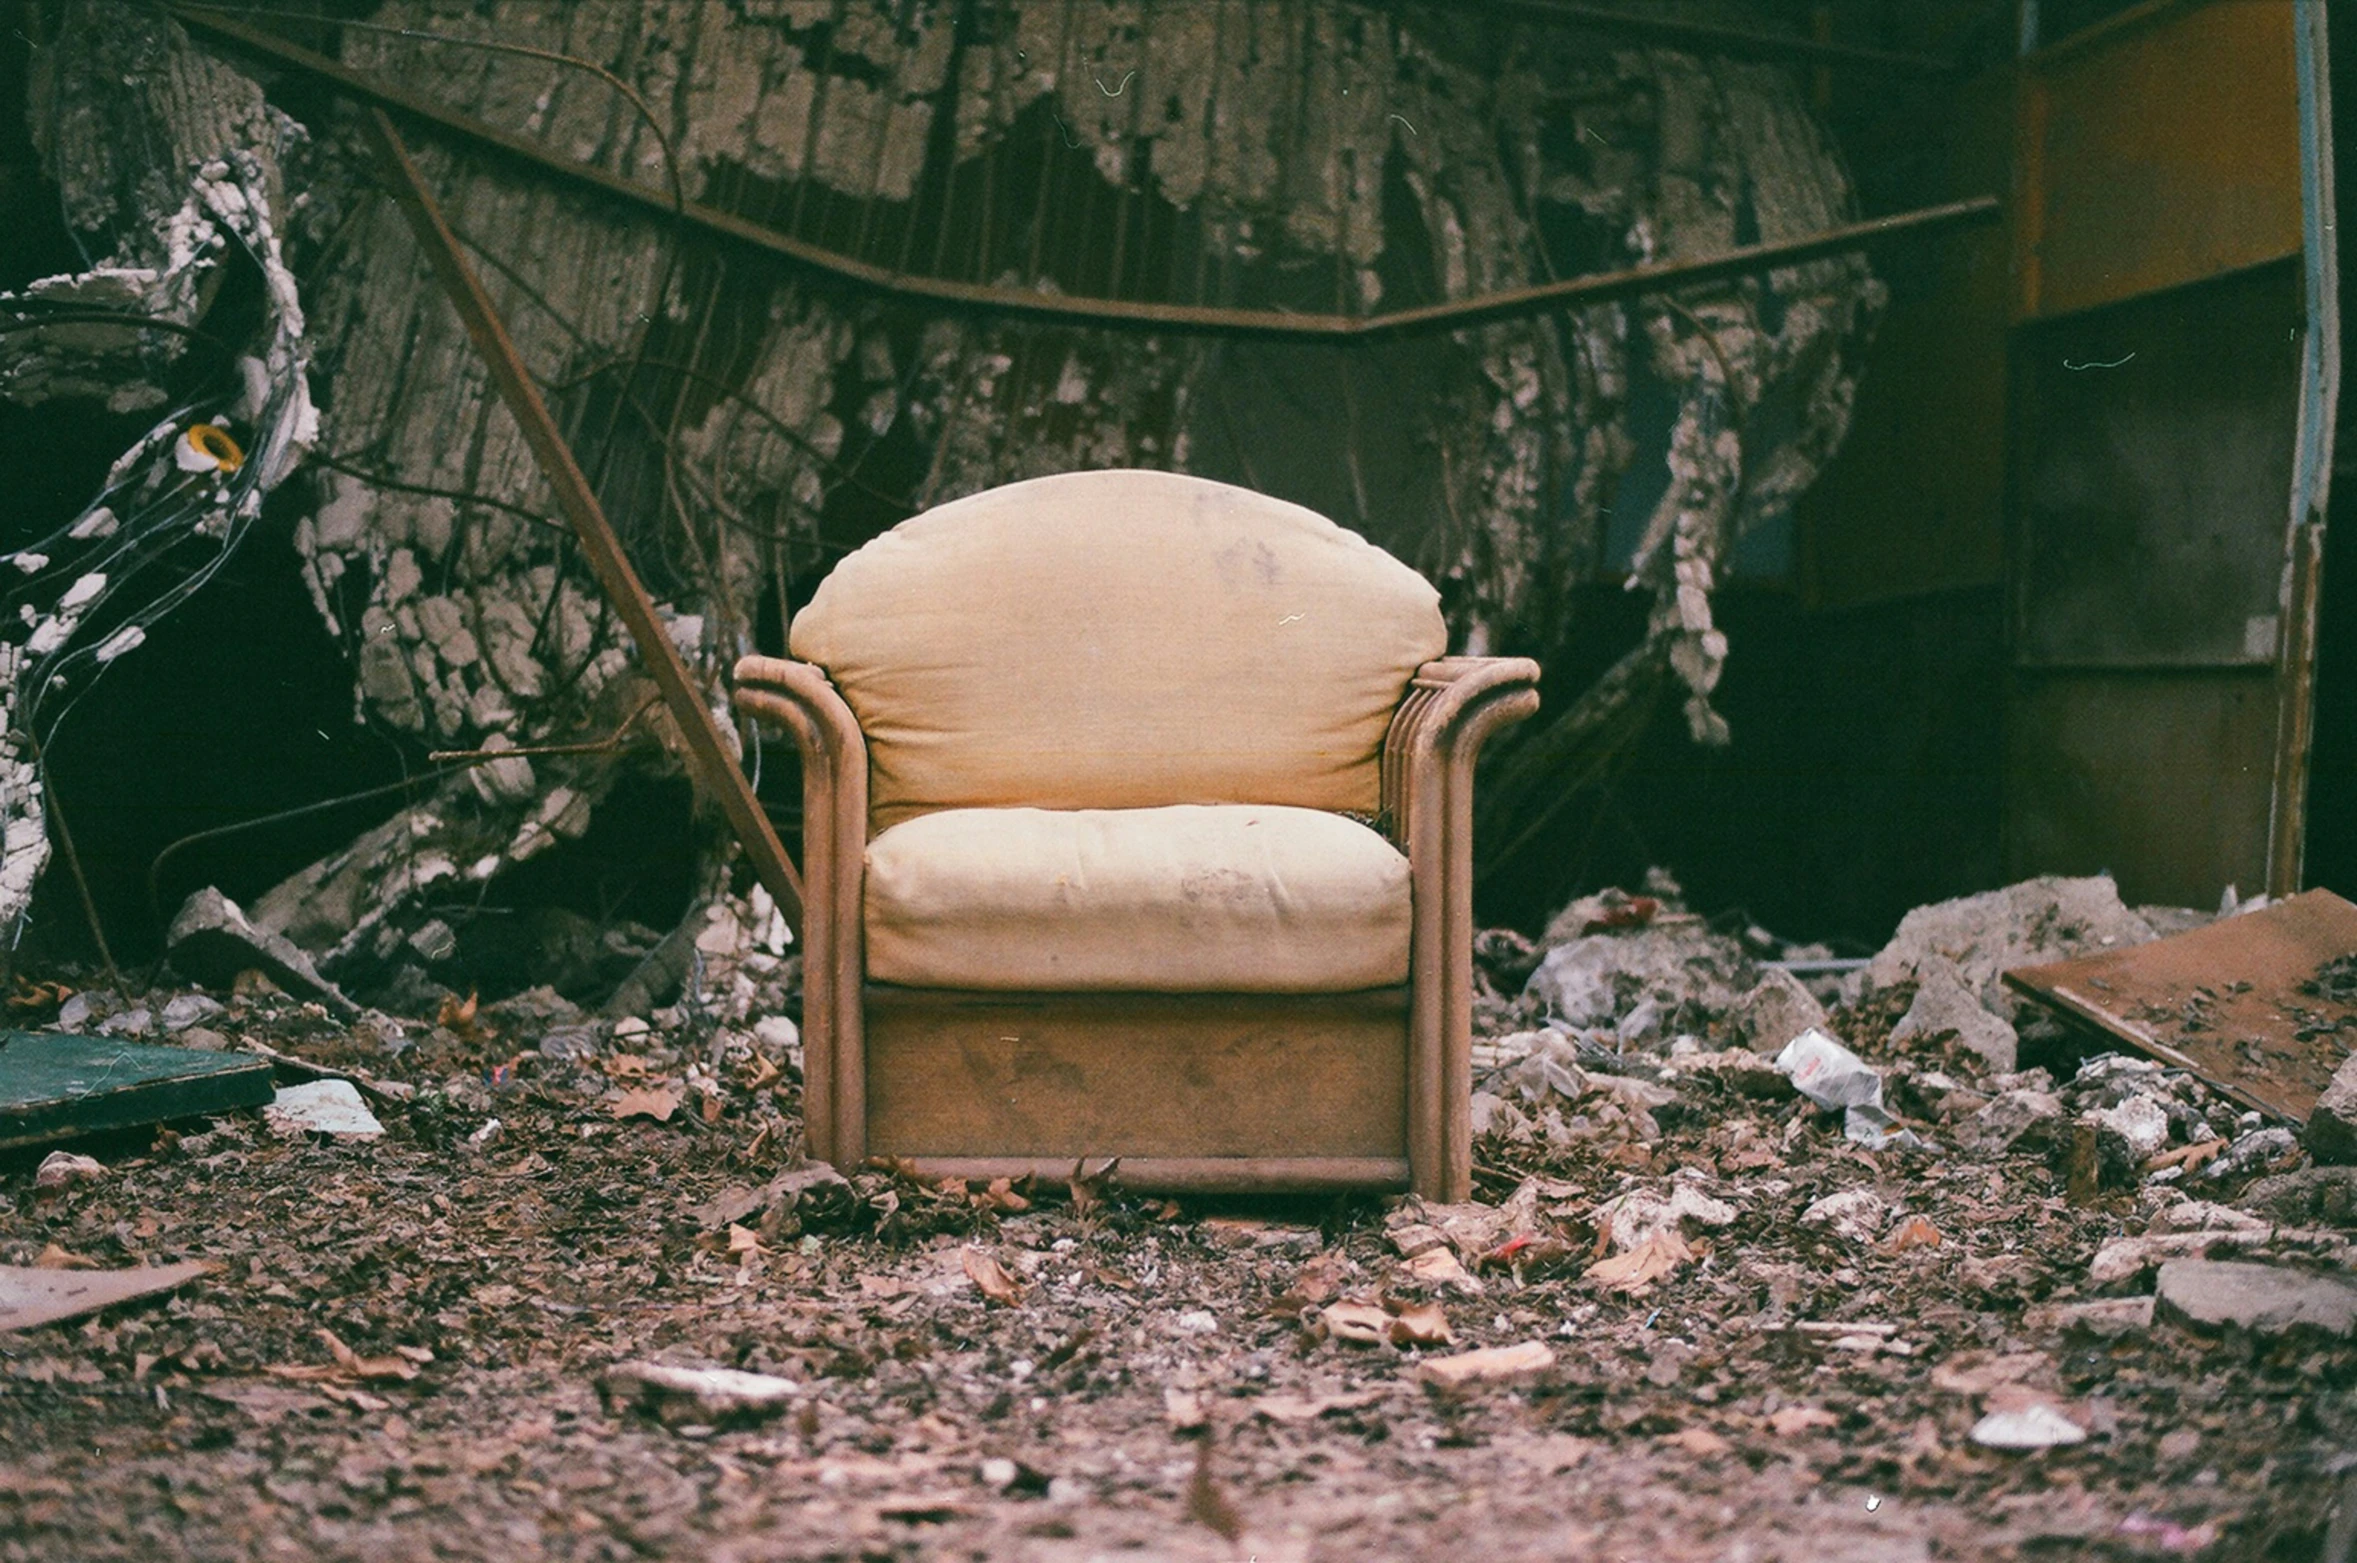 an old brown chair sitting on the ground next to a pile of rubble